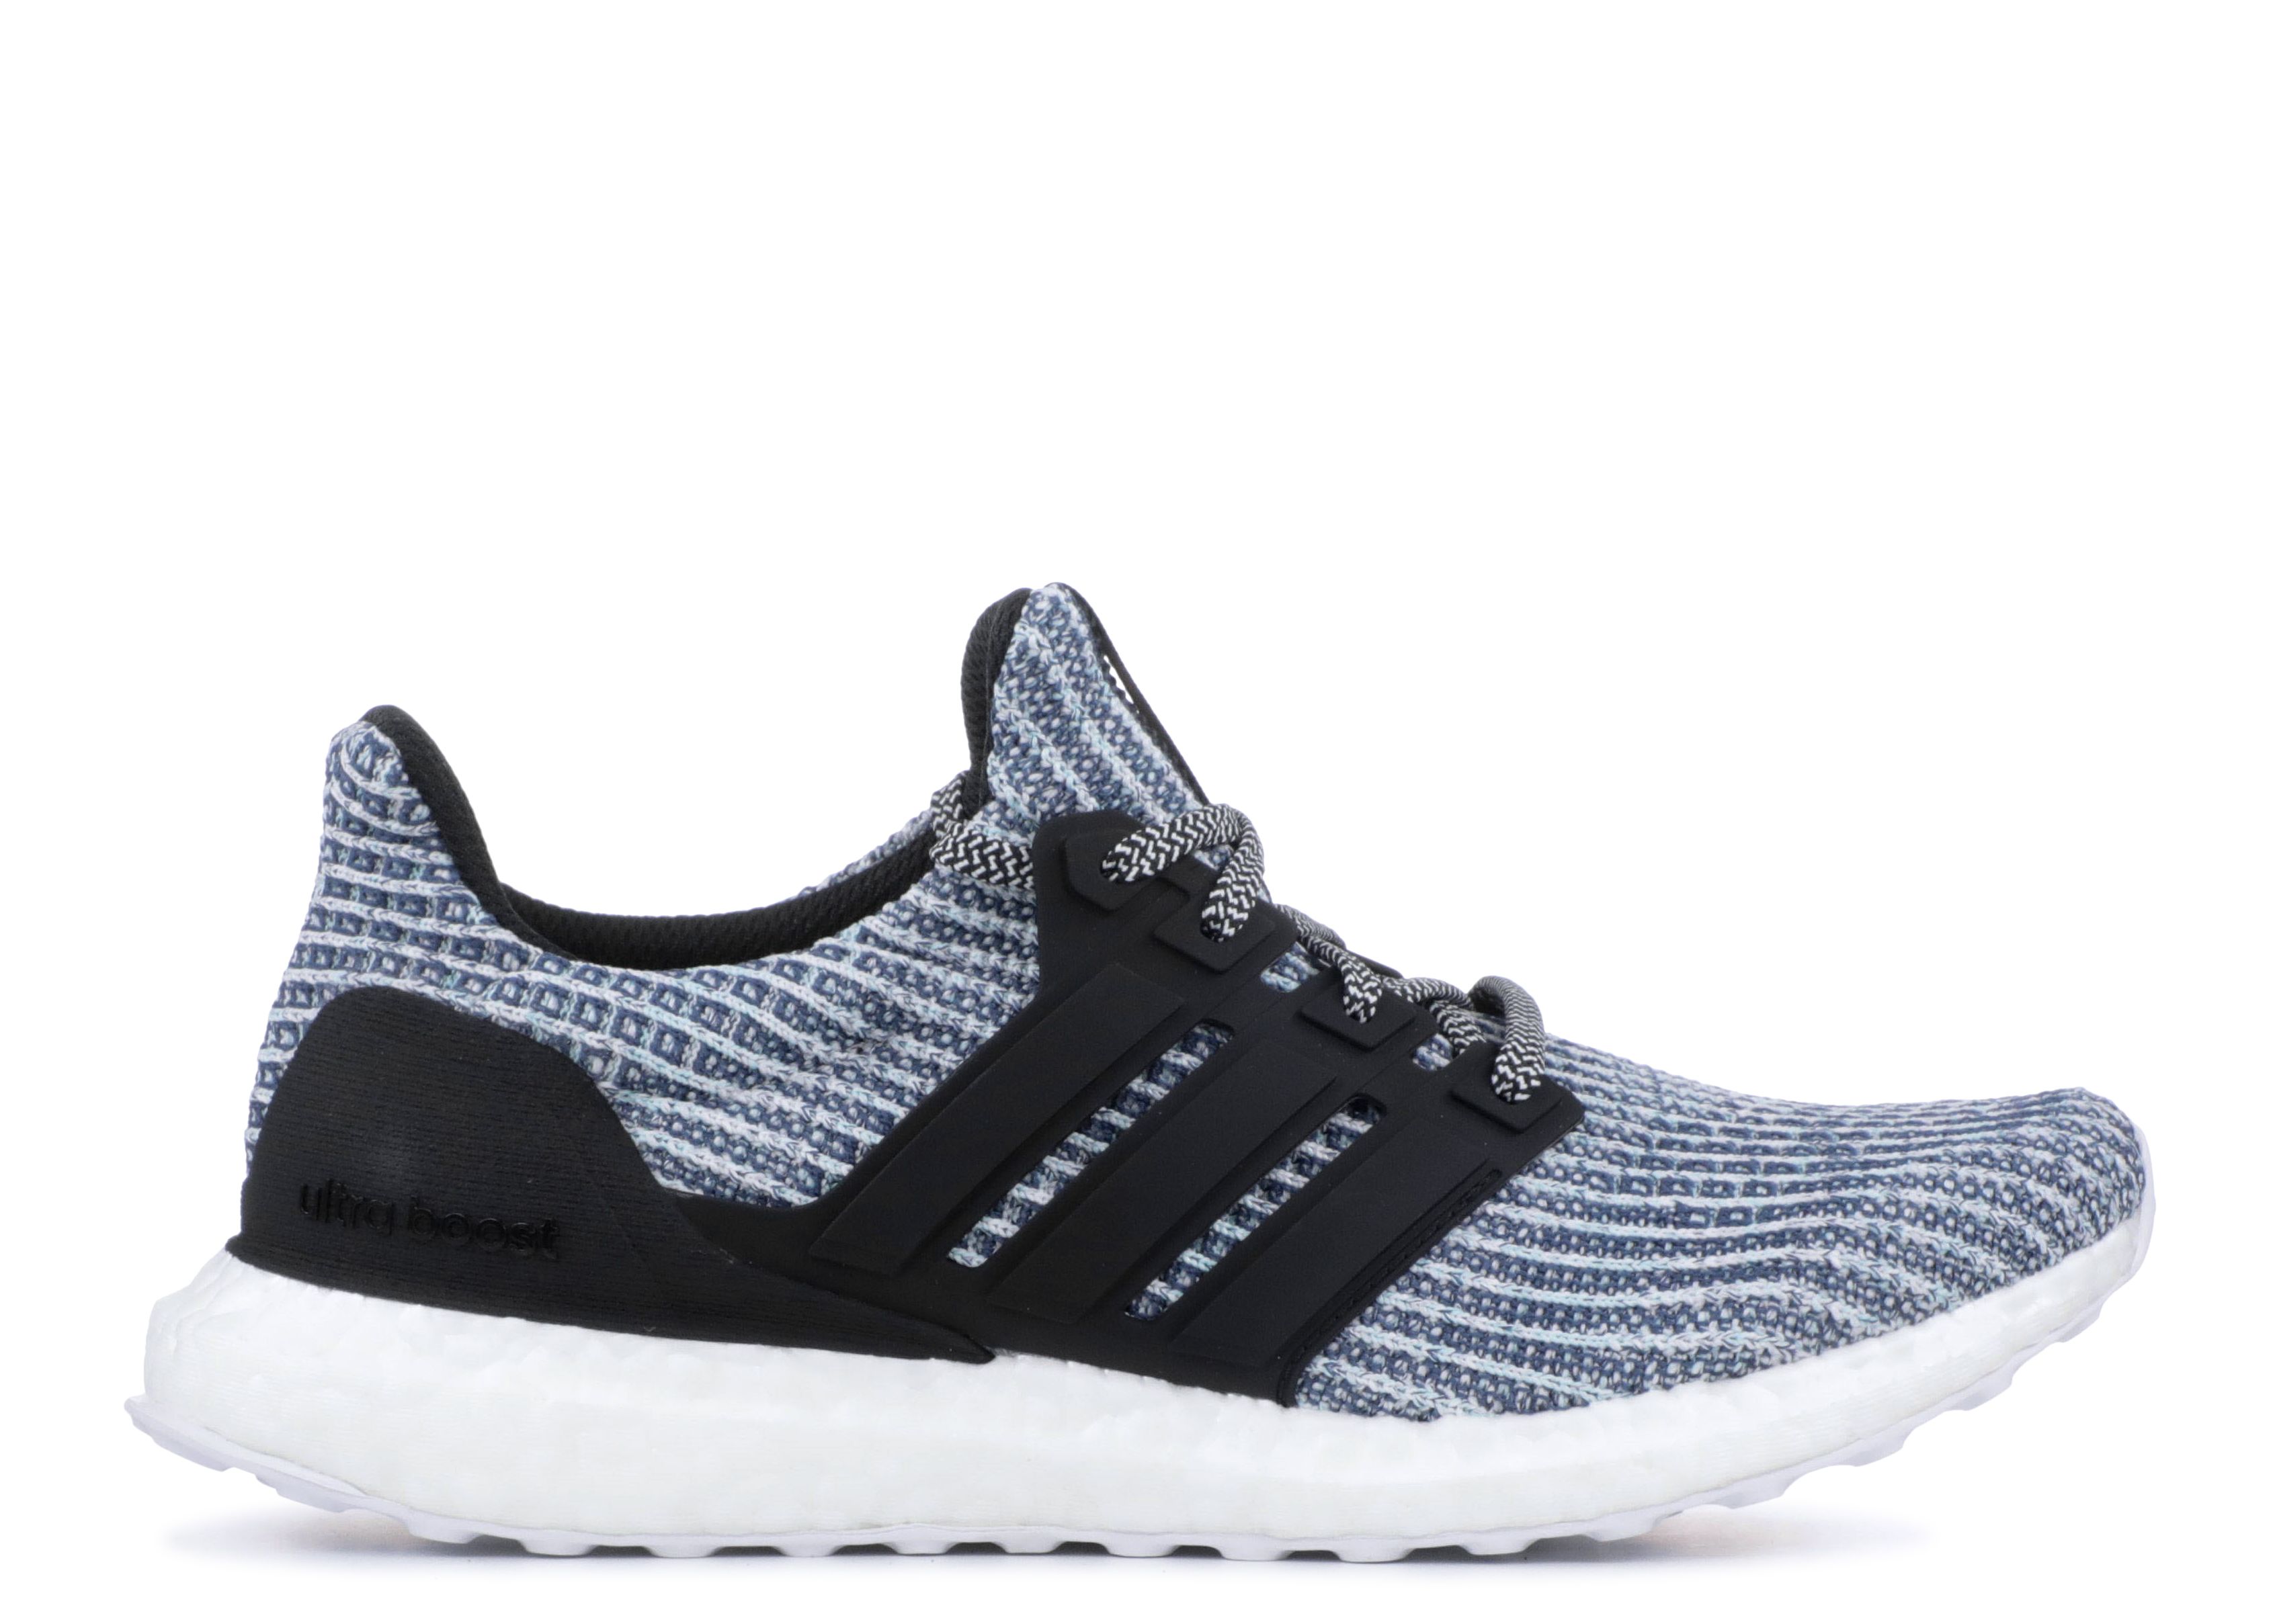 Parley X UltraBoost 4.0 'White Carbon 